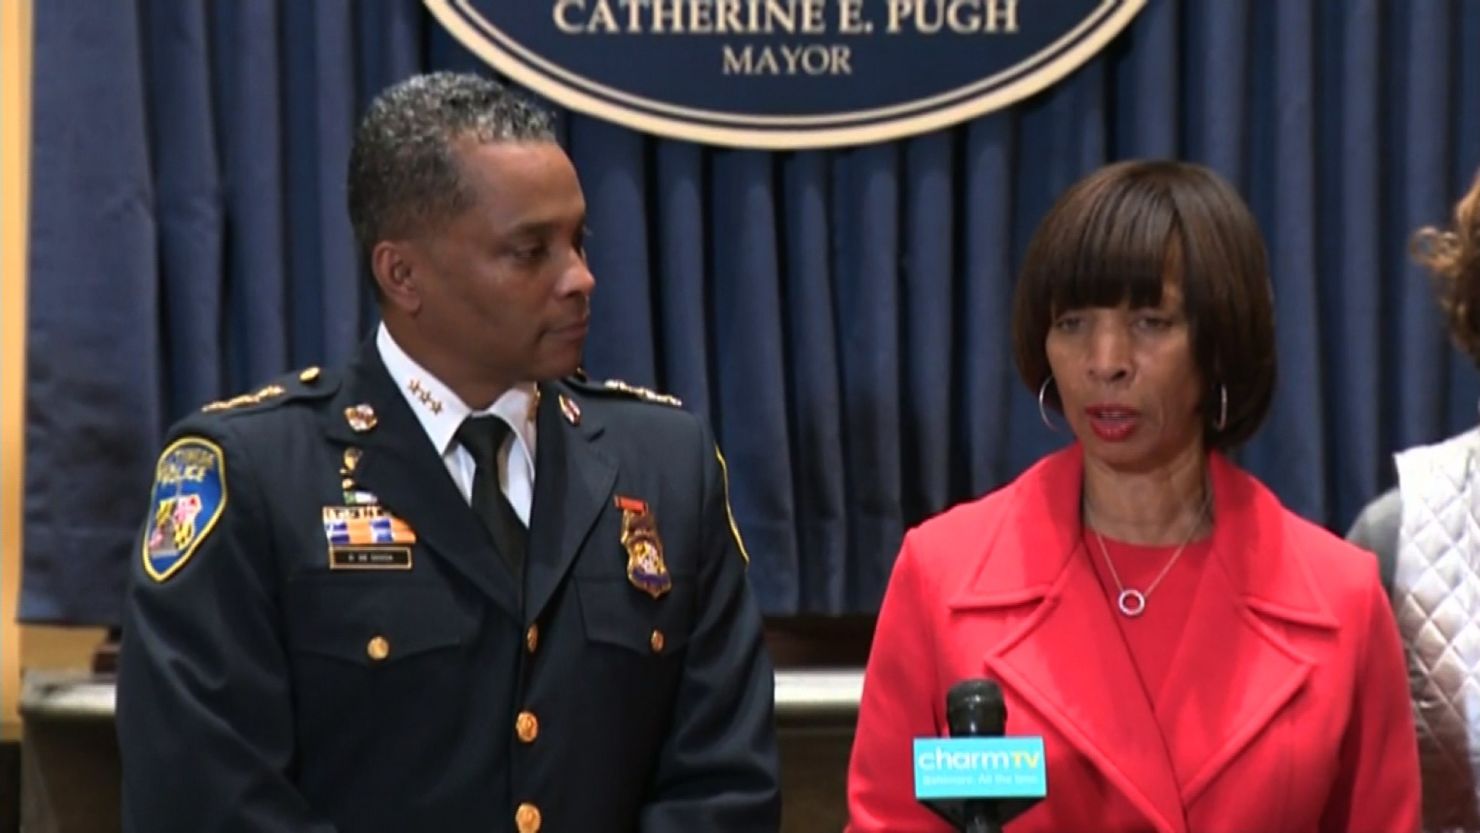 Baltimore Mayor Catherine Pugh introduces new Police Commissioner Darryl DeSousa on Friday.